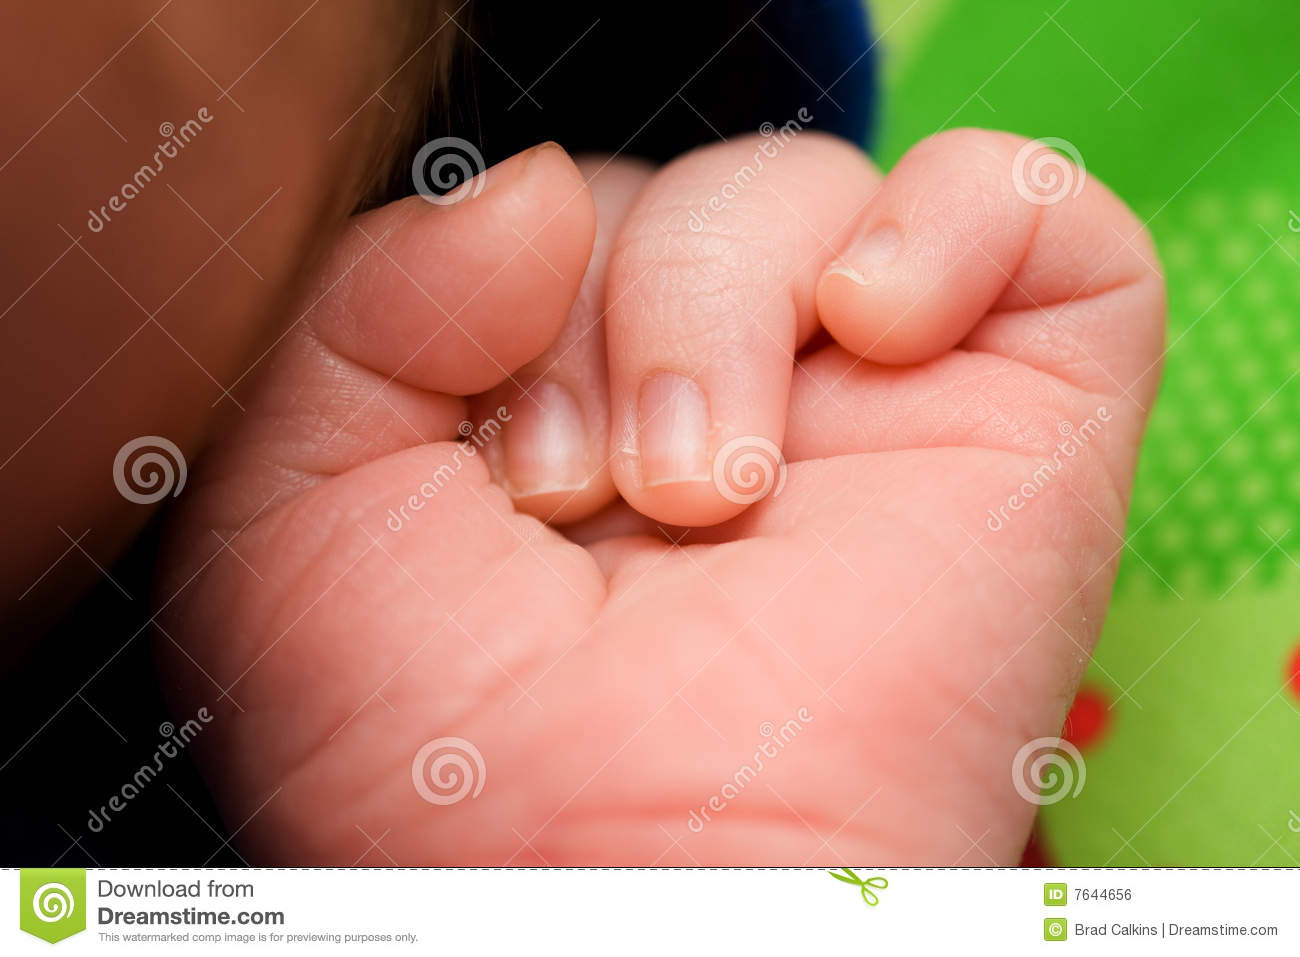 Baby Fist Royalty Free Stock Image   Image  7644656